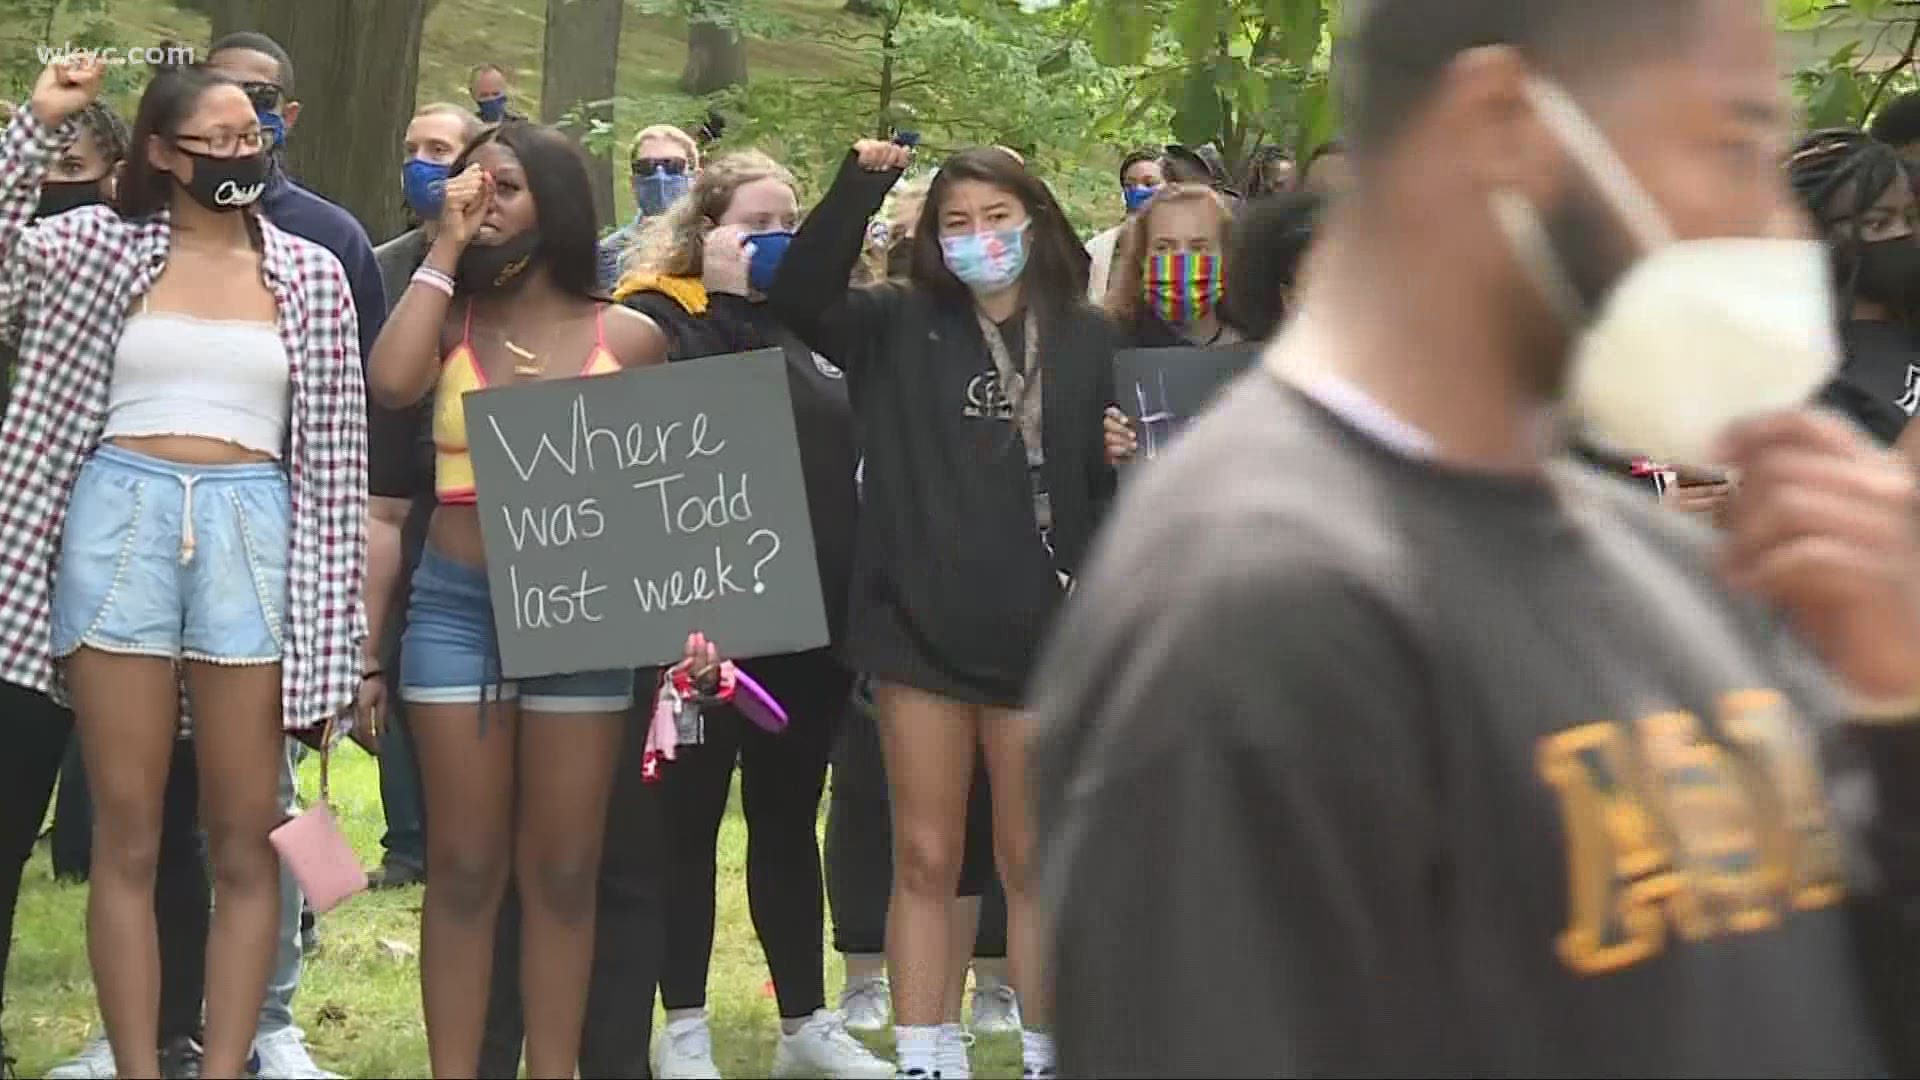 KSU's Black United Students organization walked for unity today, calling on anyone who wanted to join them to do so. This comes after the school's rock controversy.